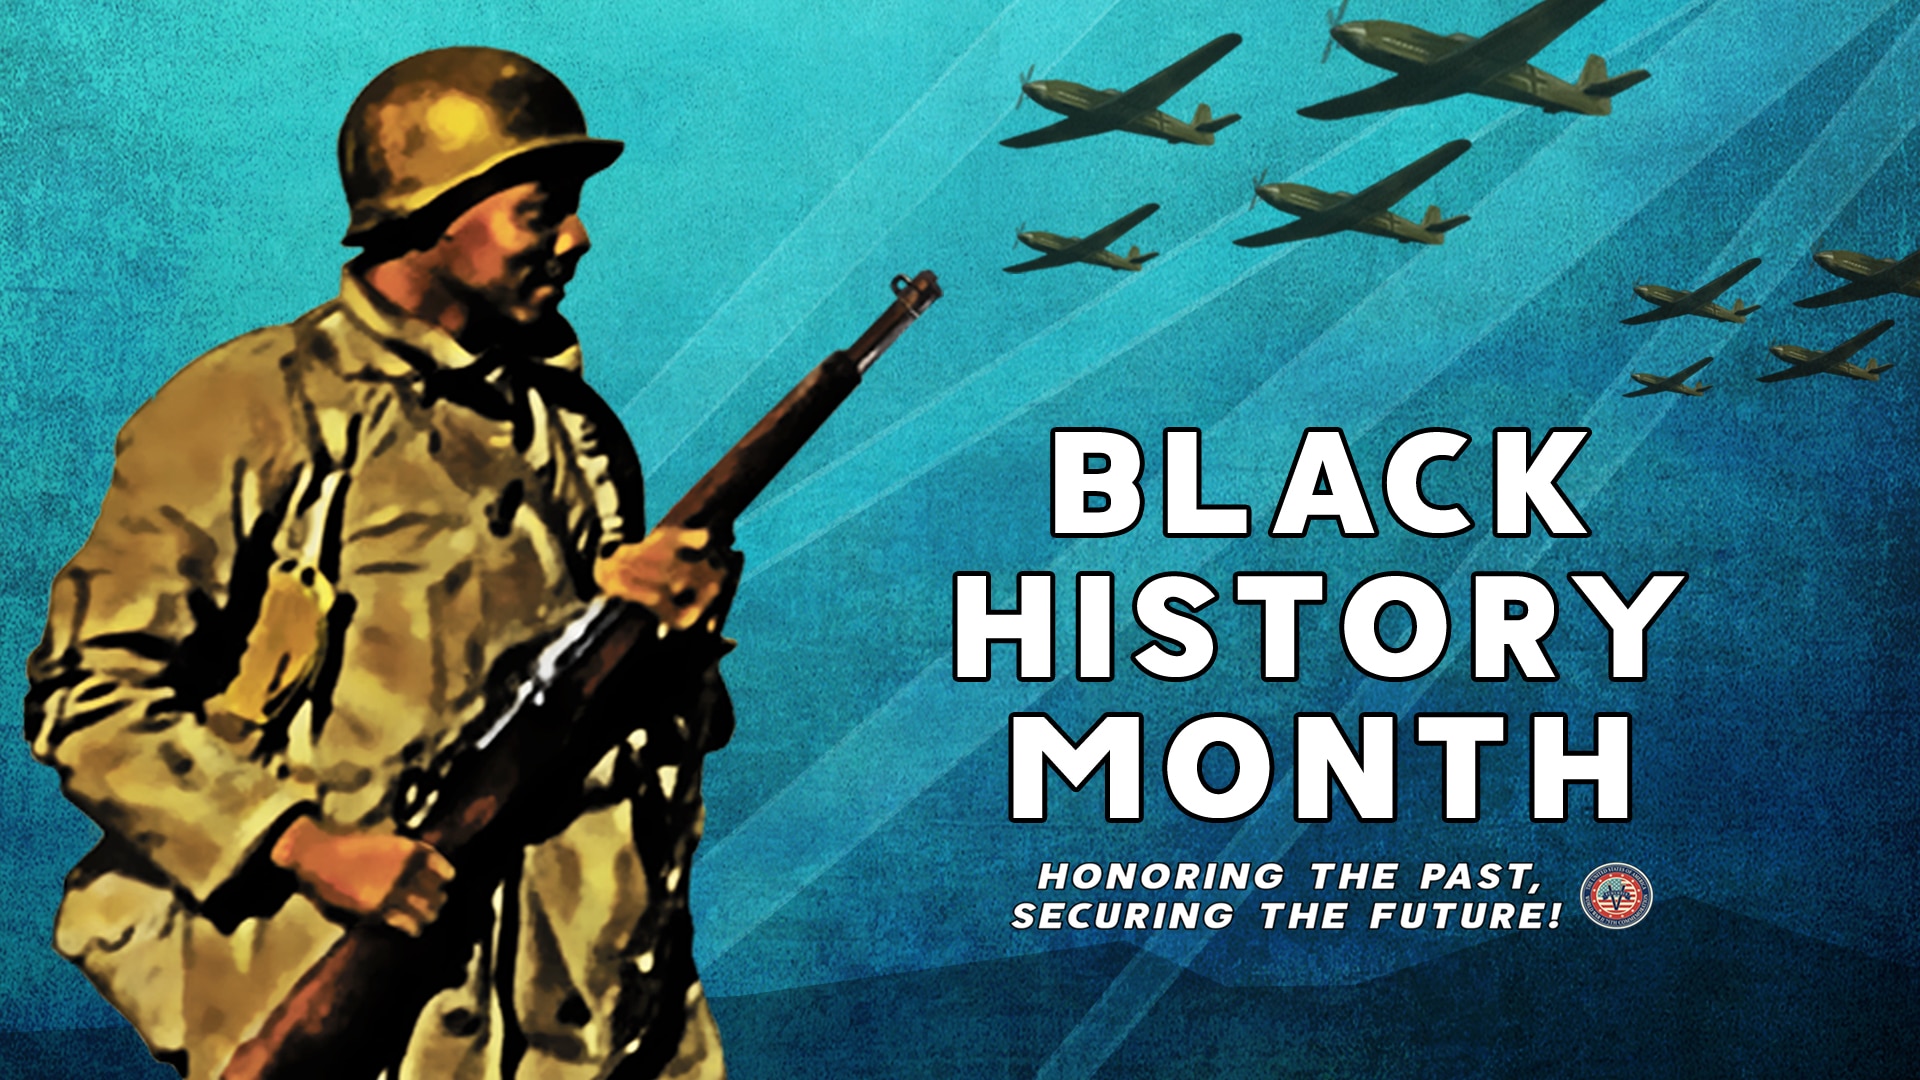 Black History Month Poster from Defense Equal Opportunity Management Institute.